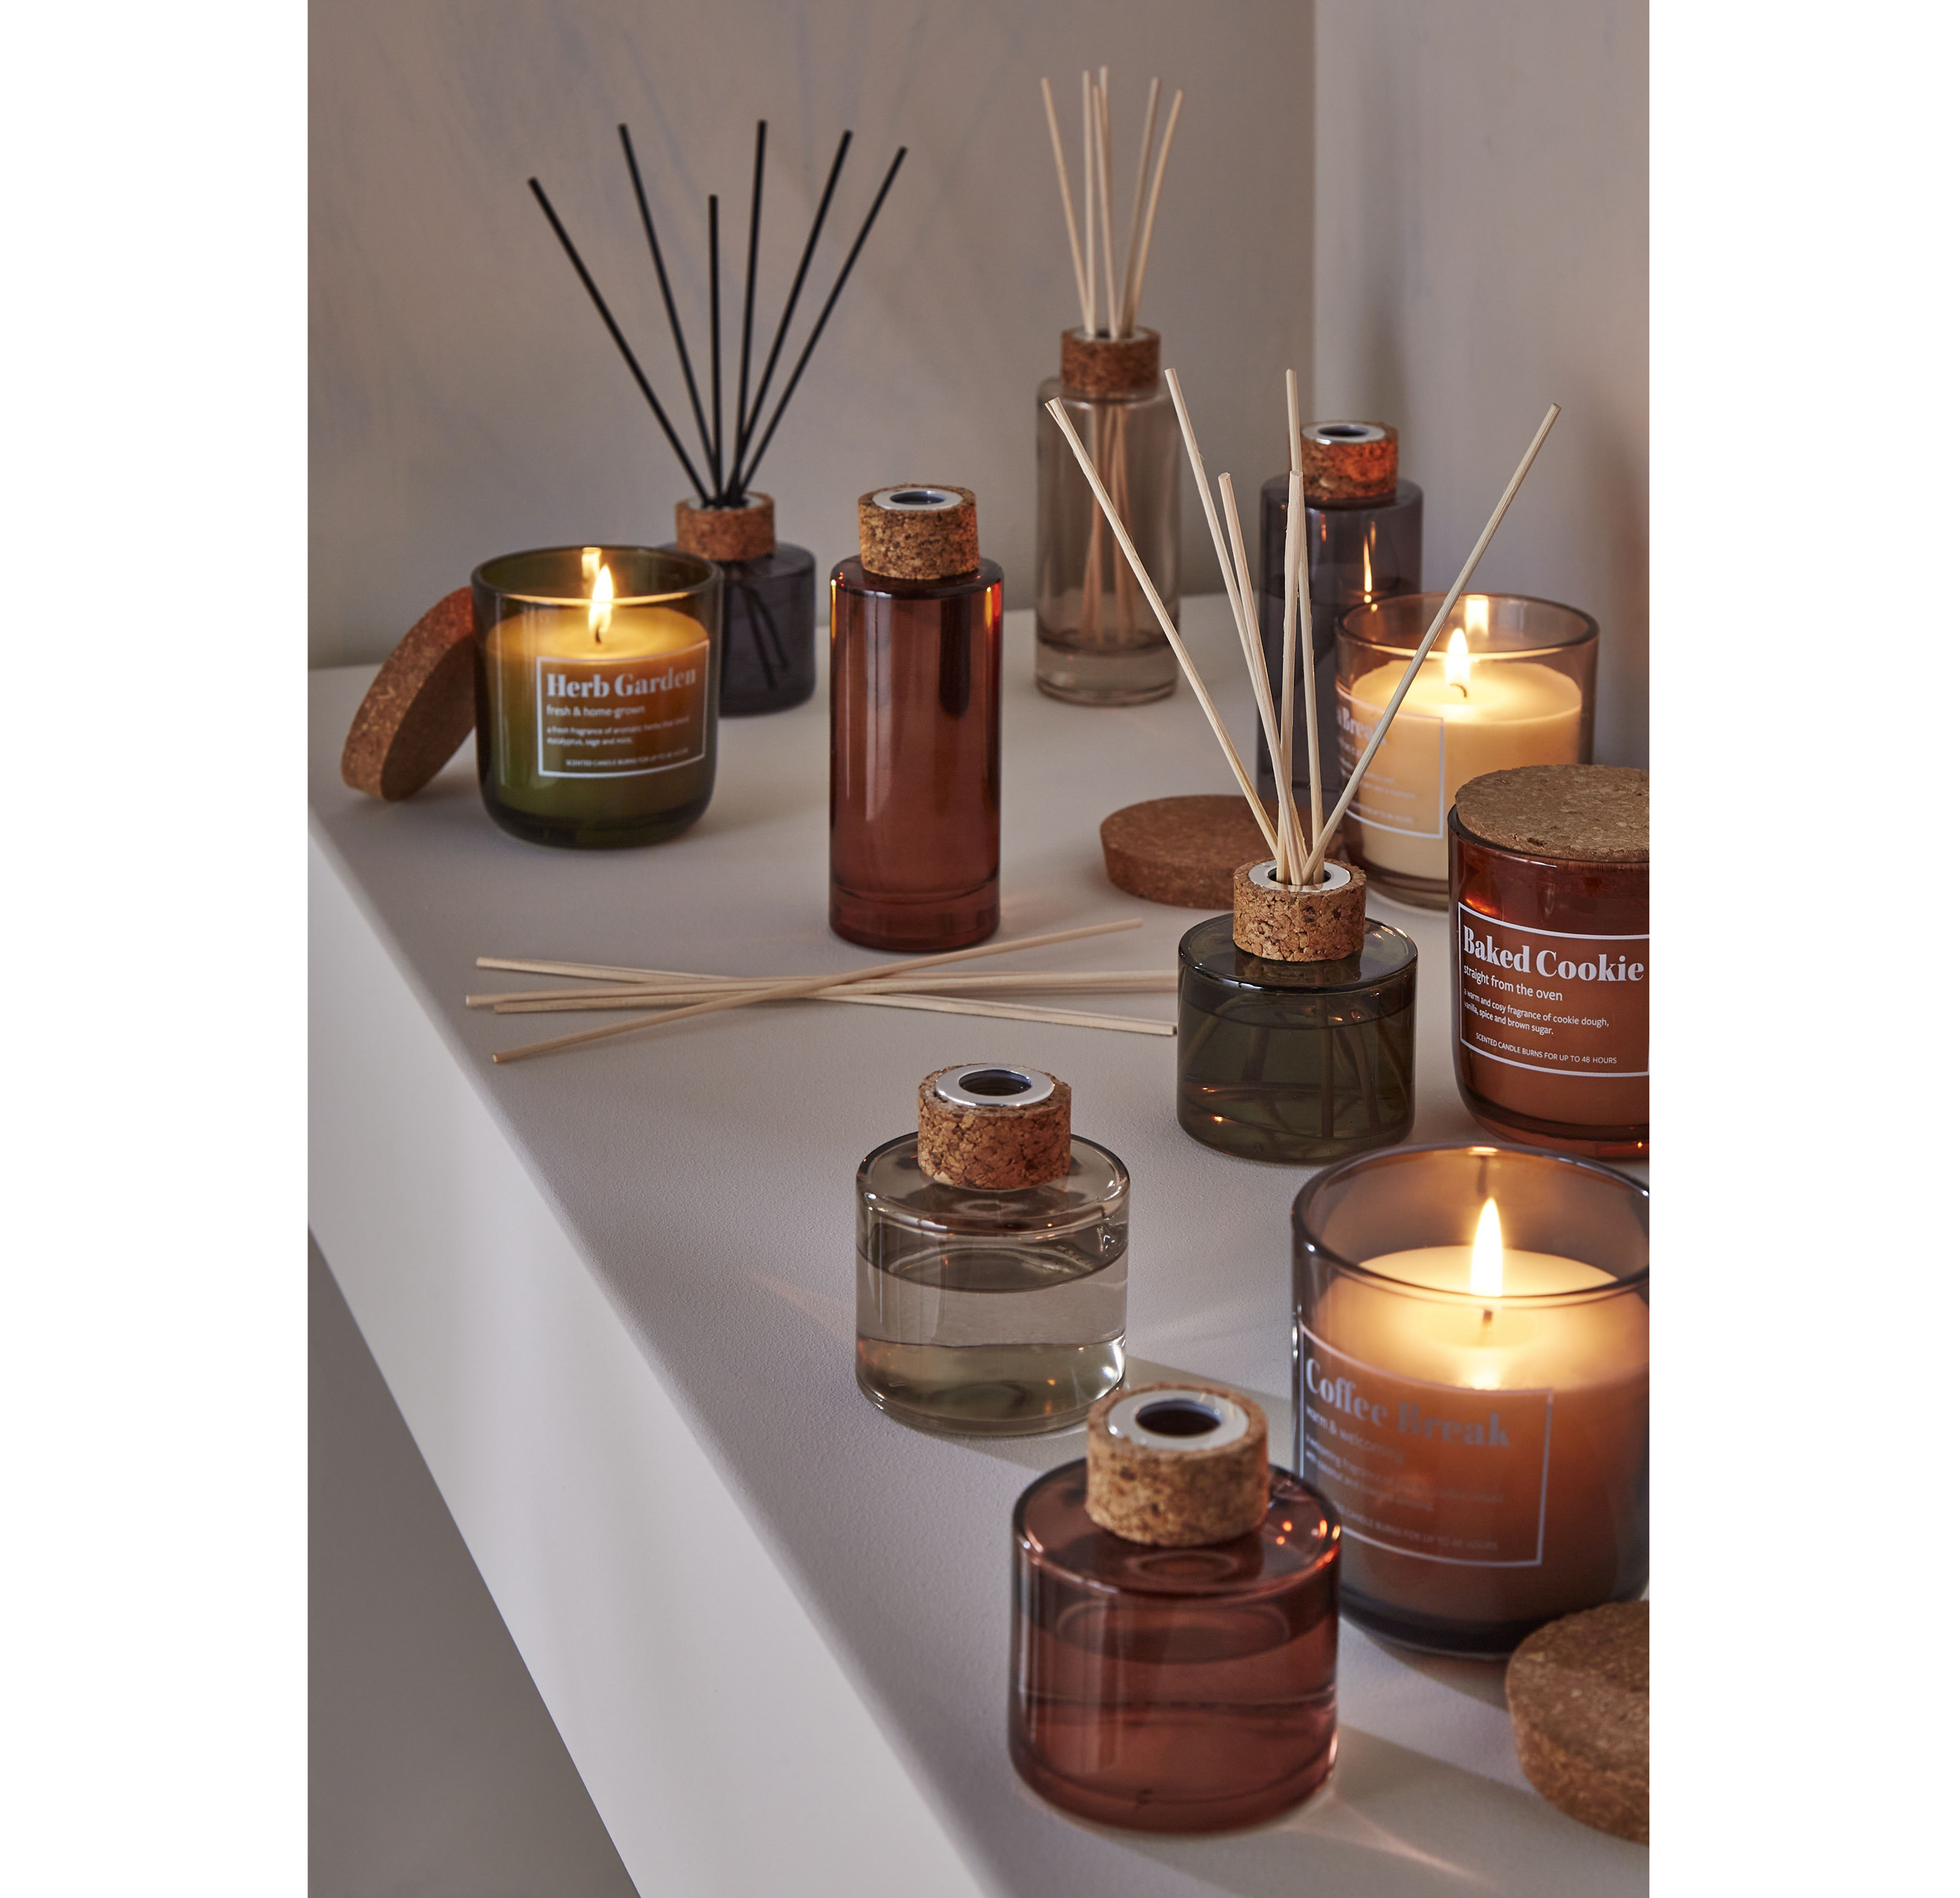 Baked Cookie Reed Diffuser, from £7, candles from a selection, Matalan